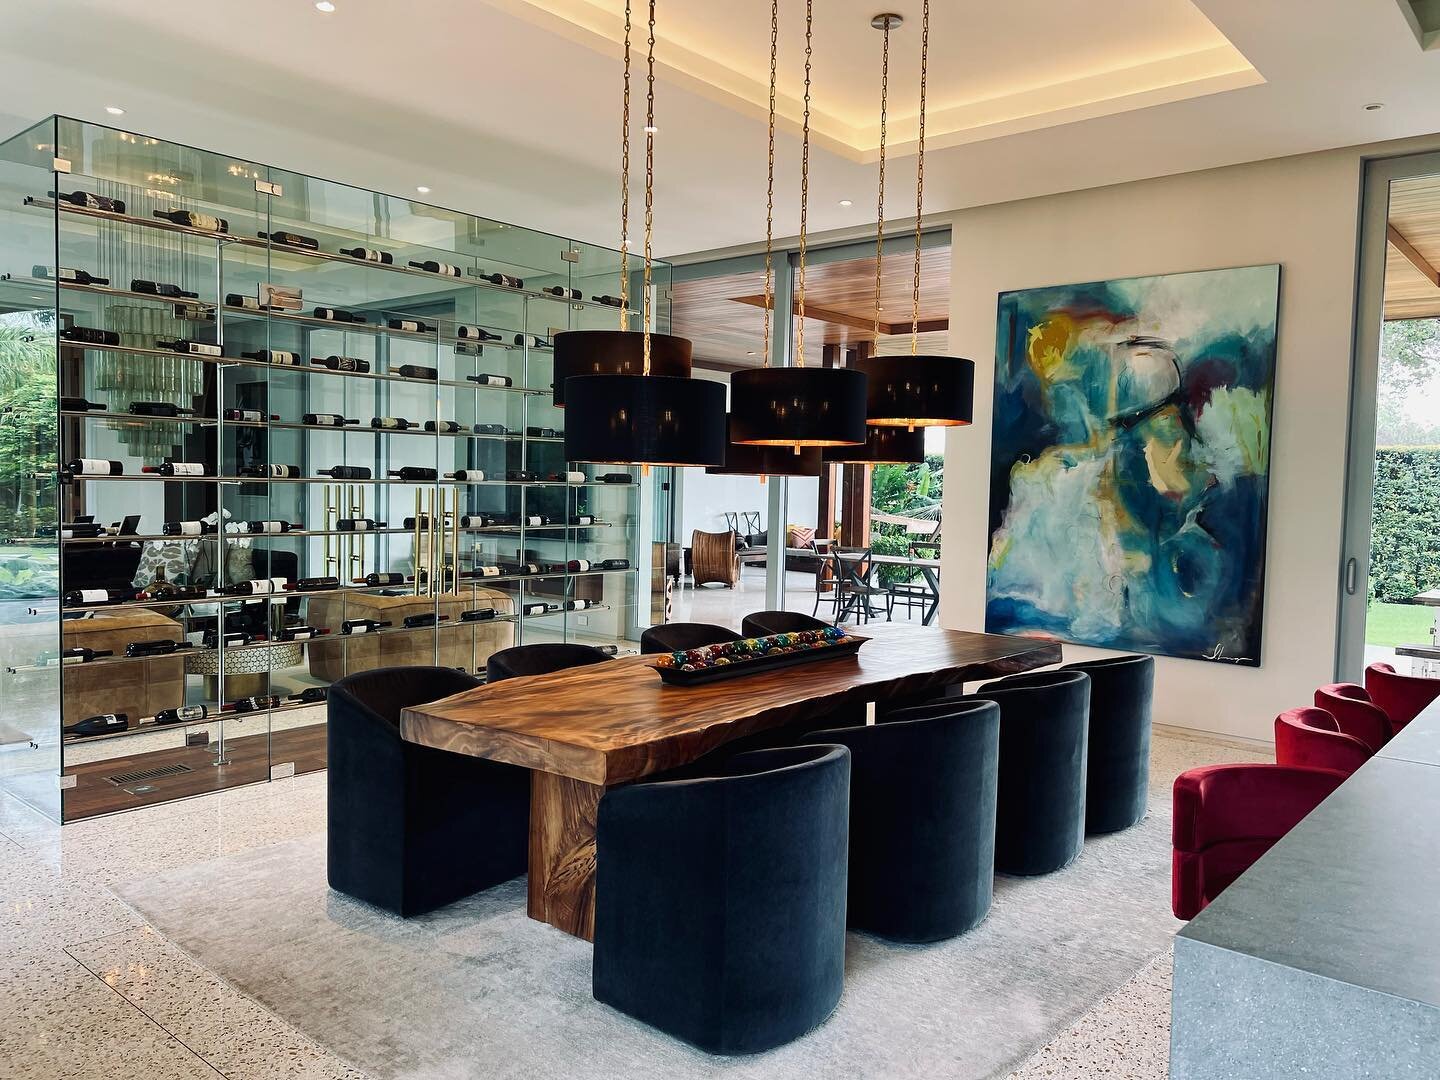 You can find this sophisticated Hollywood glam decor not only in California but also in South FL. Inspired by mid-twentieth century and Hollywood&rsquo;s golden age this design is made up of high contrast colors with over the top paired chandeliers a